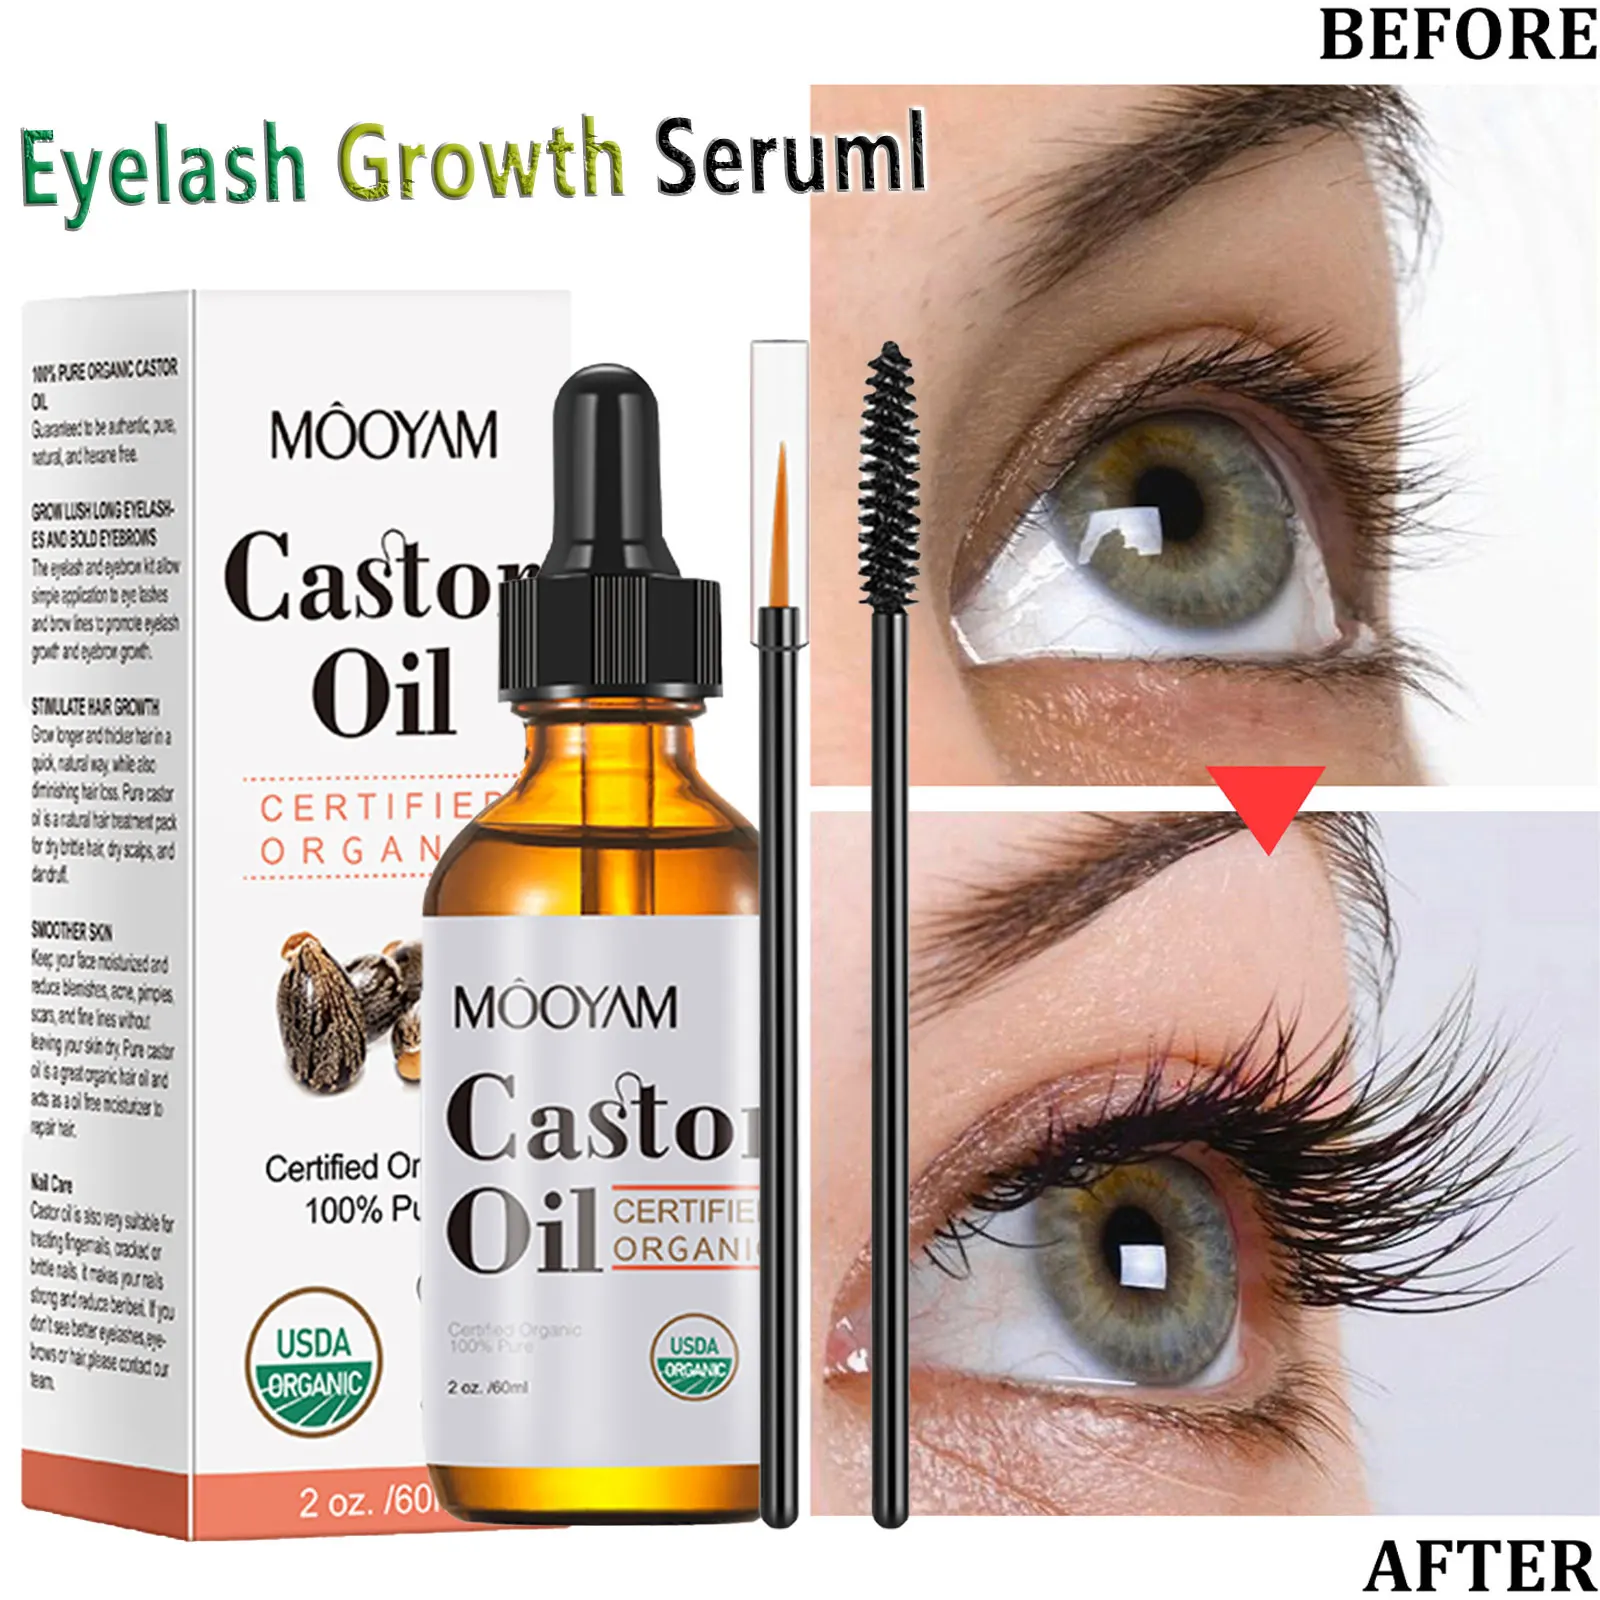 Skincare Eyelash Hair Fast Growth Solution The Ordinary Eyelash Growth Korean Cosmetics Recipe Beauty-Health And Personal Care health bed massage therapy bed european style tattoo embroidery eyelash bed spa